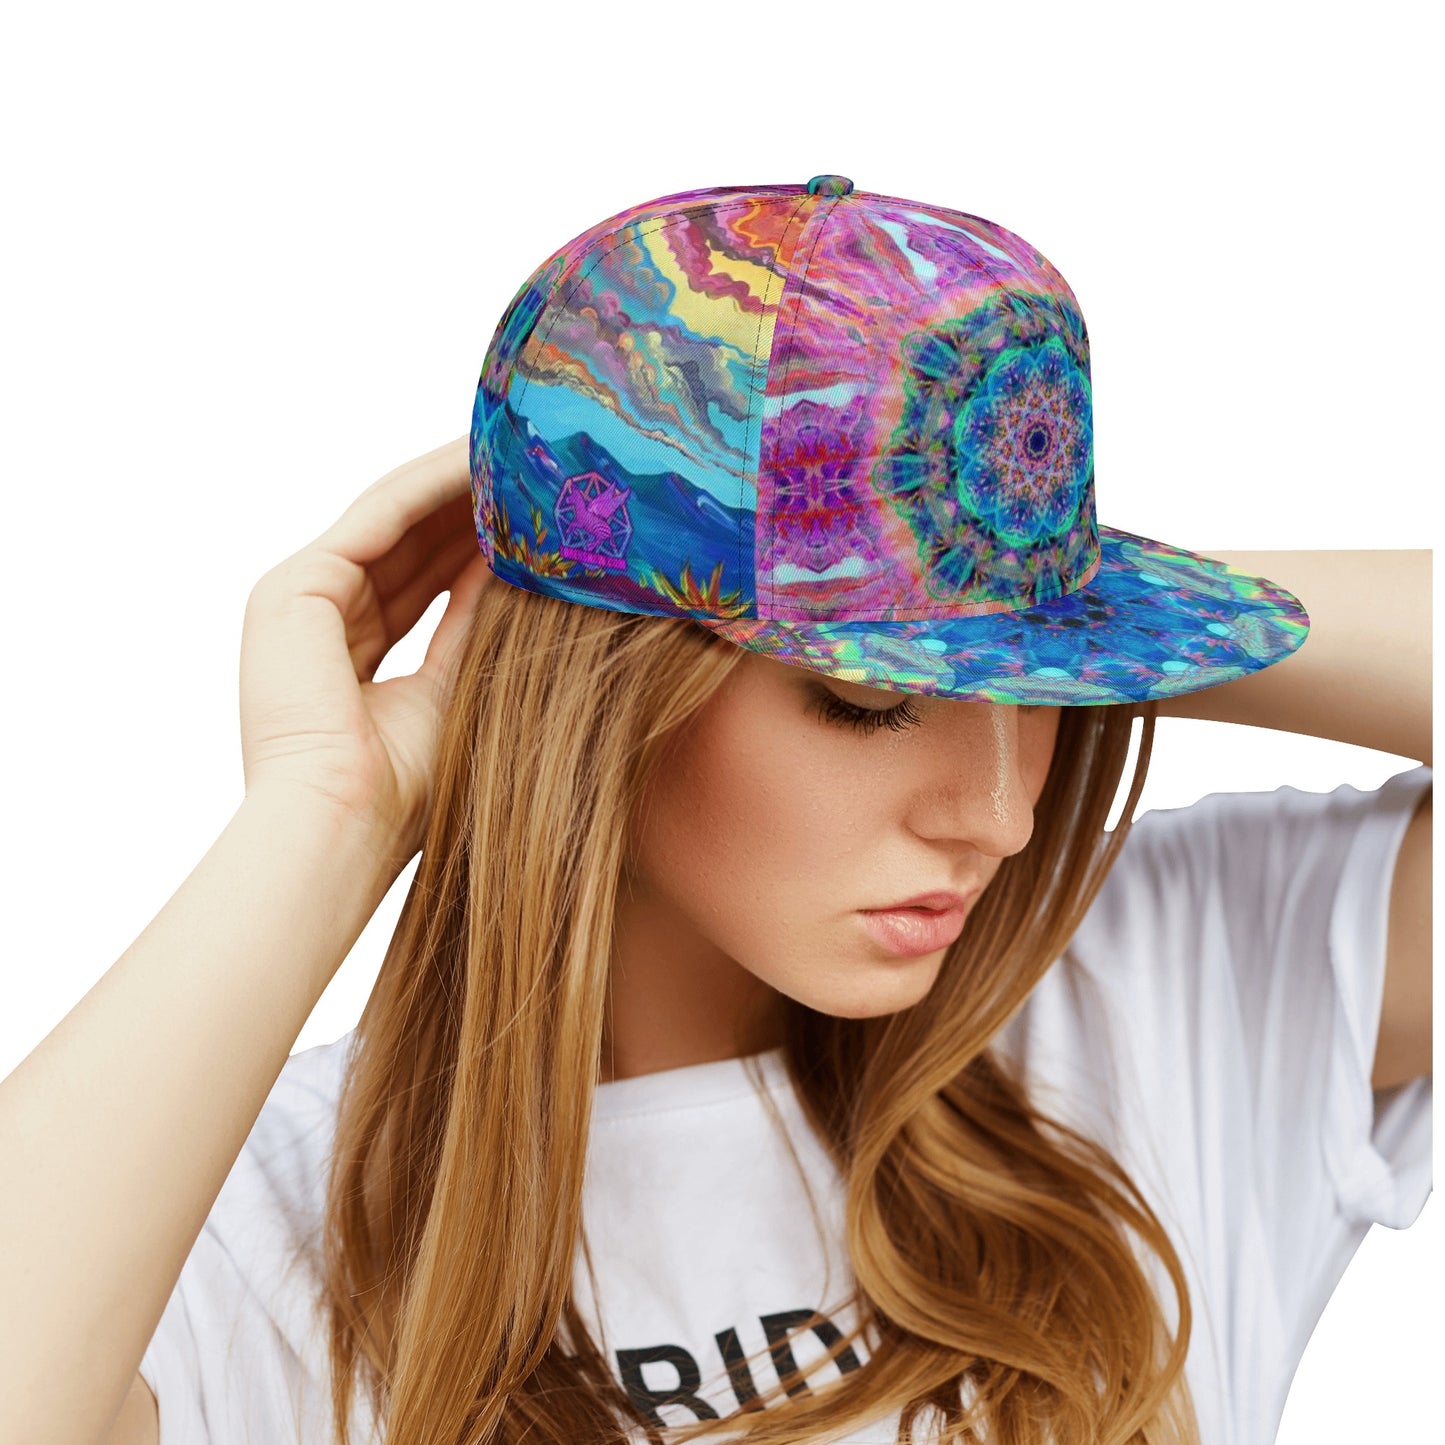 Painted Clouds Snapback Hat